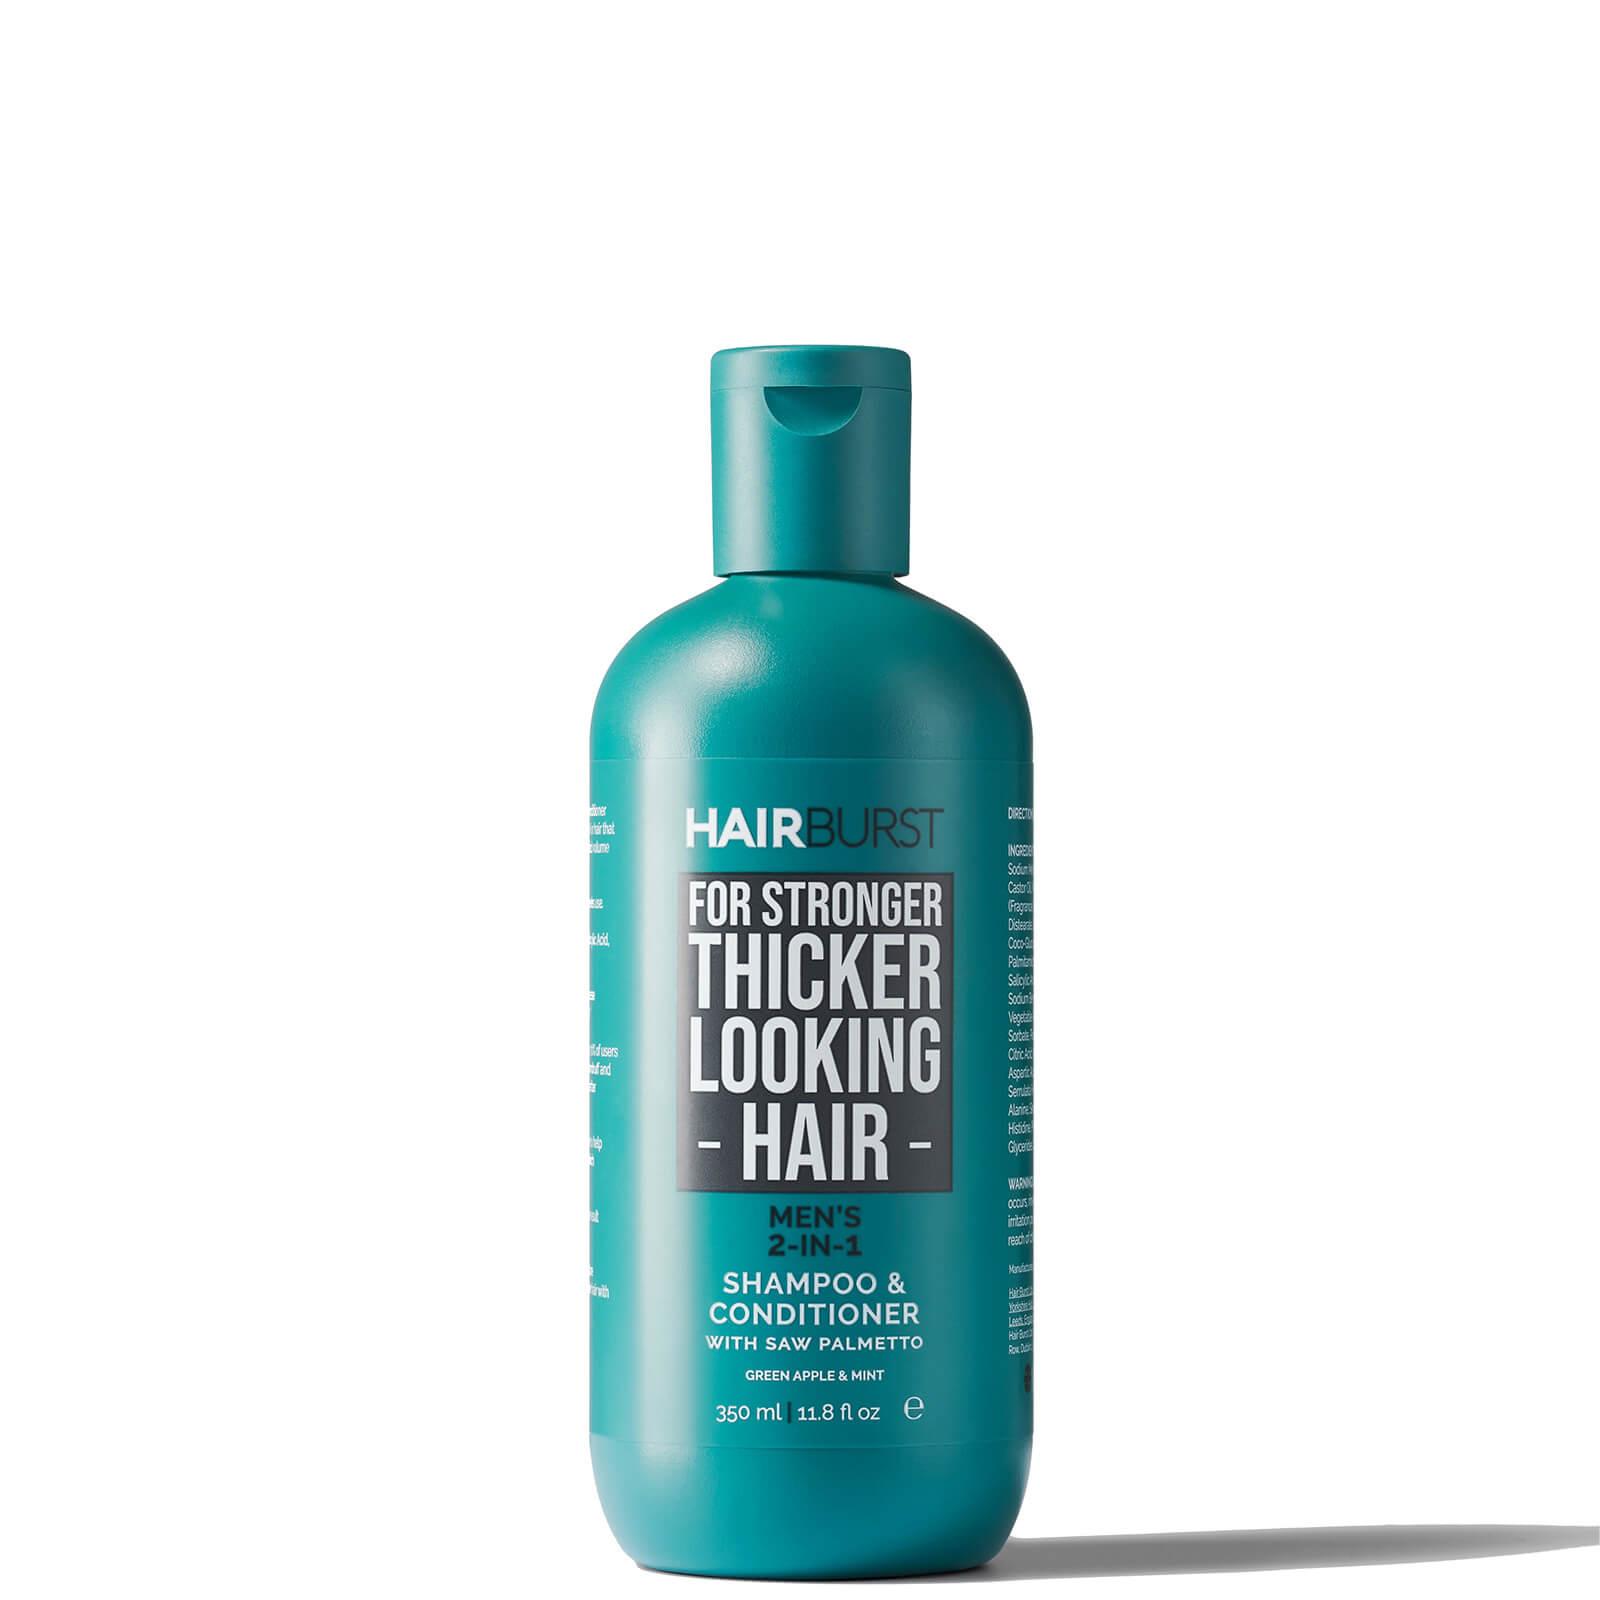 Hairburst Men's 2-in-1 Shampoo and Conditioner 350ml